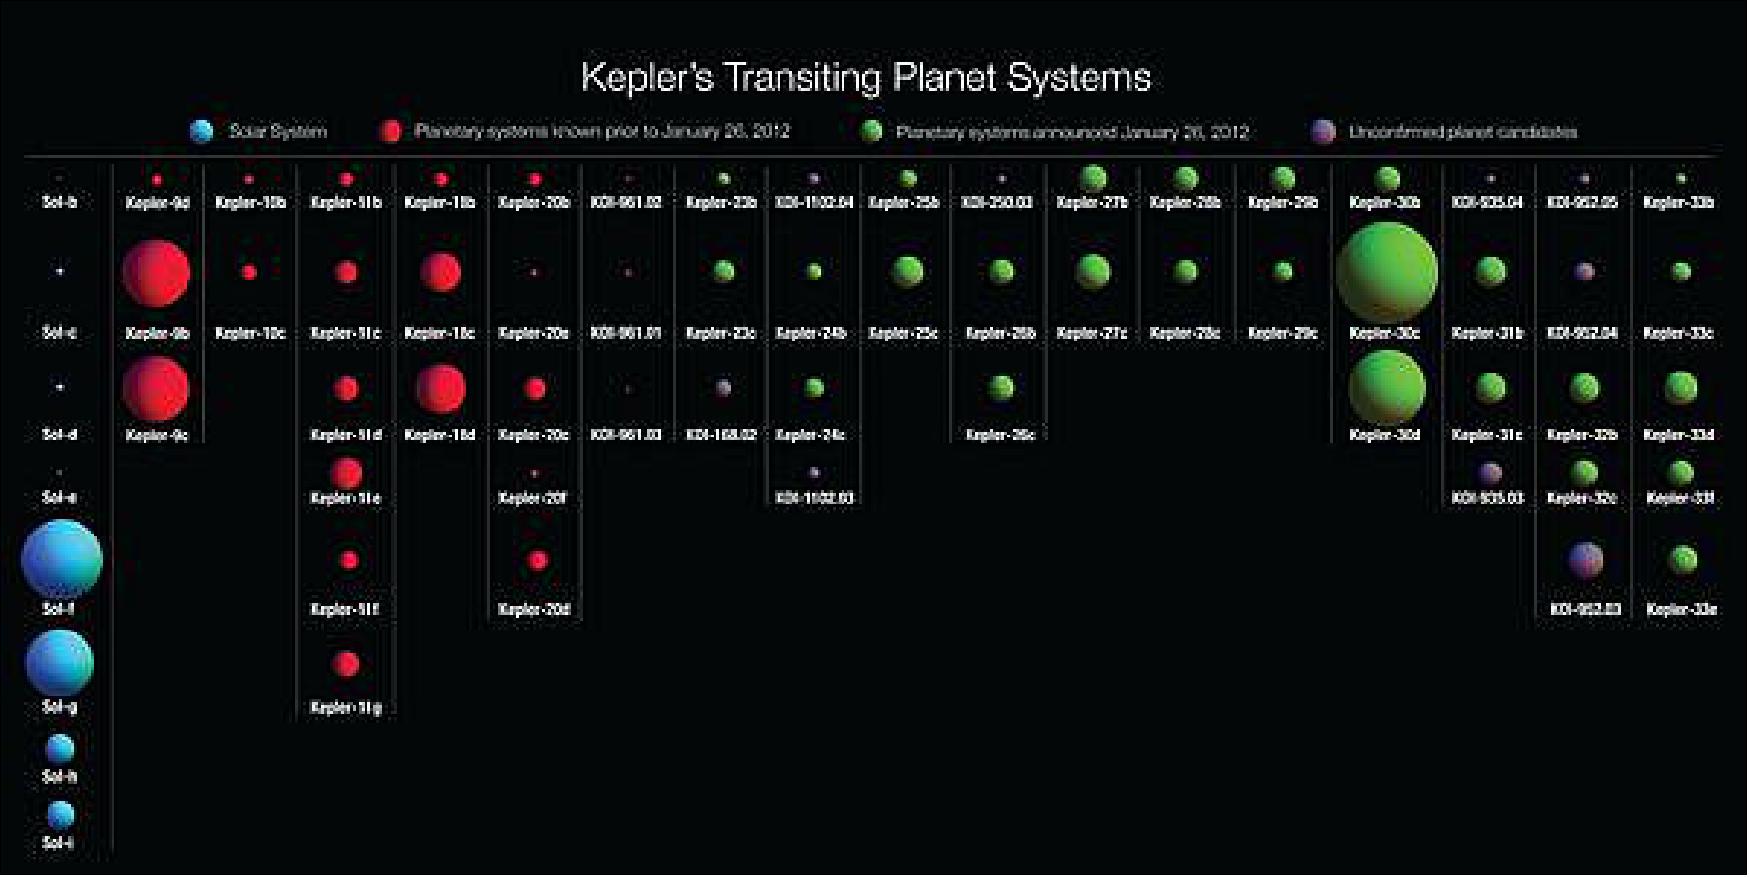 Figure 70: The artist's rendering depicts the multiple planet systems discovered by NASA's Kepler mission. Out of hundreds of candidate planetary systems, scientists had previously verified six systems with multiple transiting planets (denoted here in red). Now, Kepler observations have verified planets (shown here in green) in 11 new planetary systems. Many of these systems contain additional planet candidates that are yet to be verified (shown here in dark purple). For reference, the eight planets of our Solar System are shown in blue along the left edge of the image (image credit: NASA Ames/Jason Steffen, Fermilab Center for Particle Astrophysics)